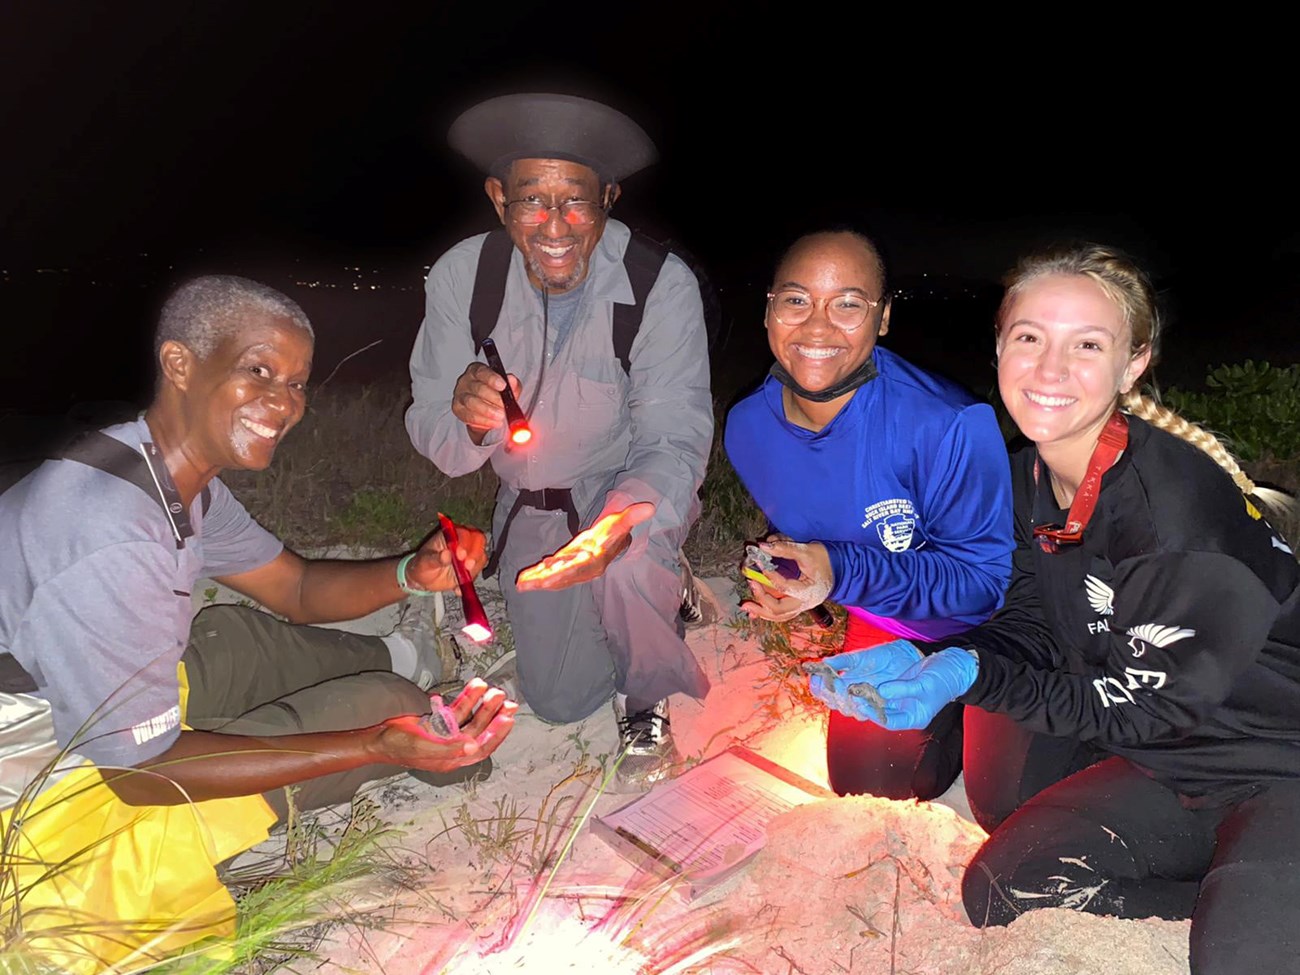 Four people sitting on the sand with flashlights, examining something.